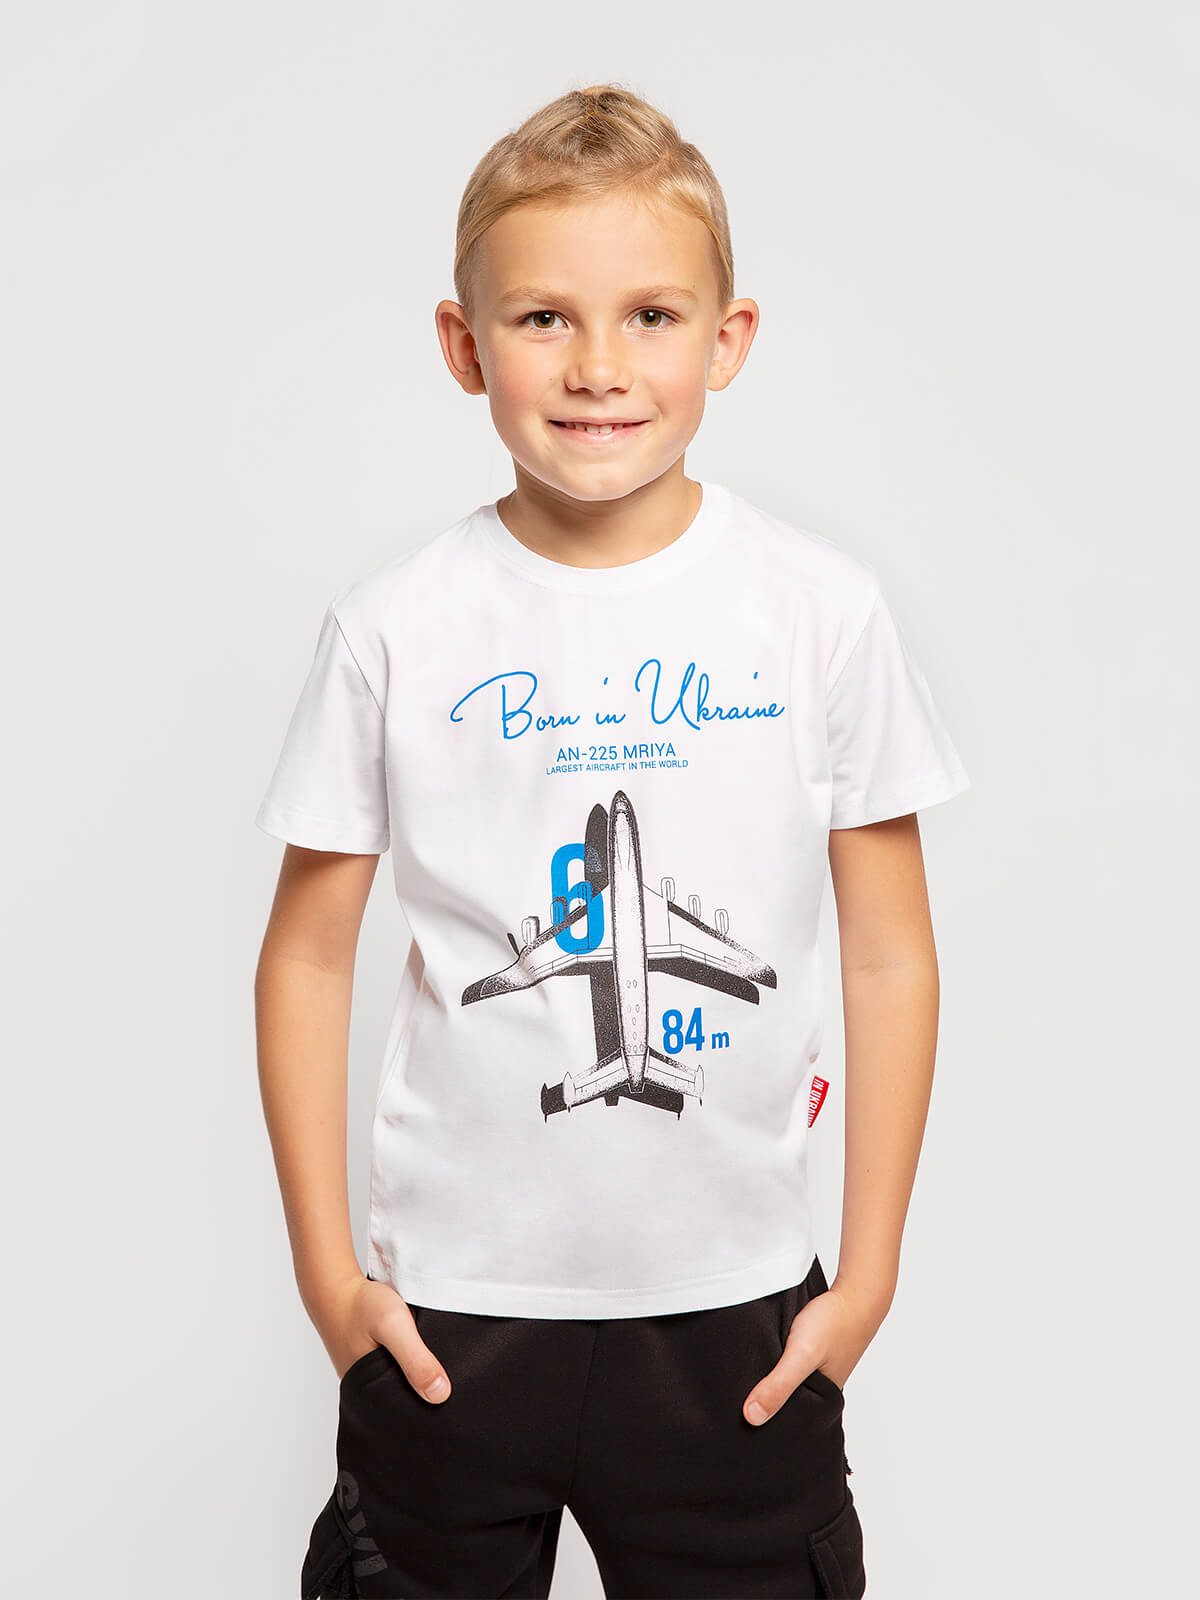 Kids T-Shirt An-225. Color white. Unisex T-shirt well suited for both boys and girls.